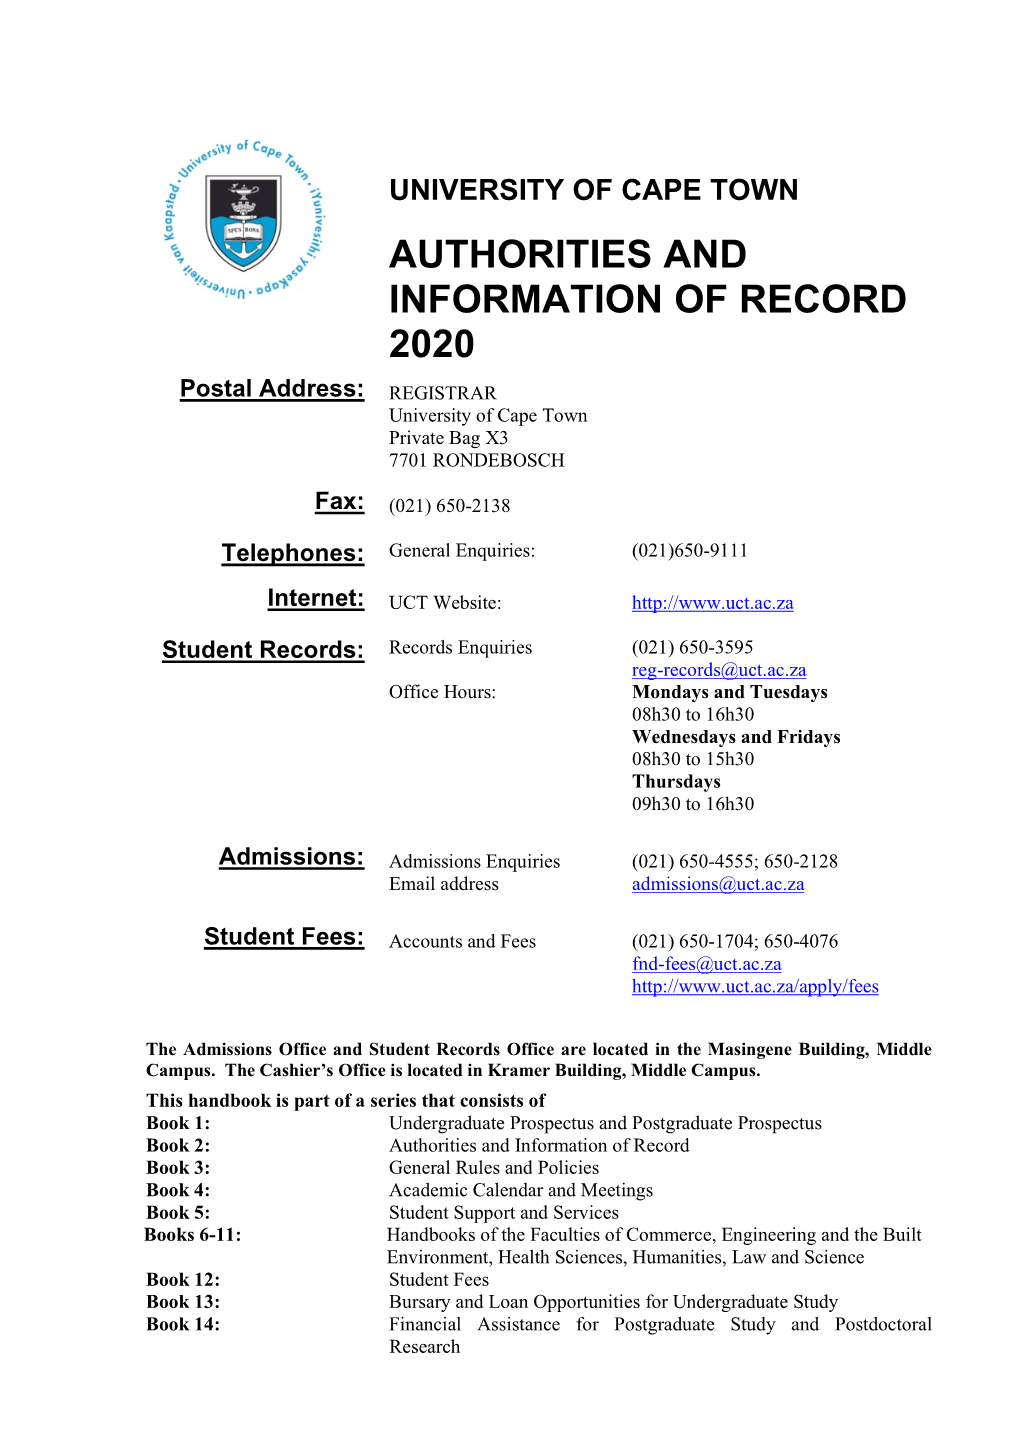 Authorities and Information of Record 2020